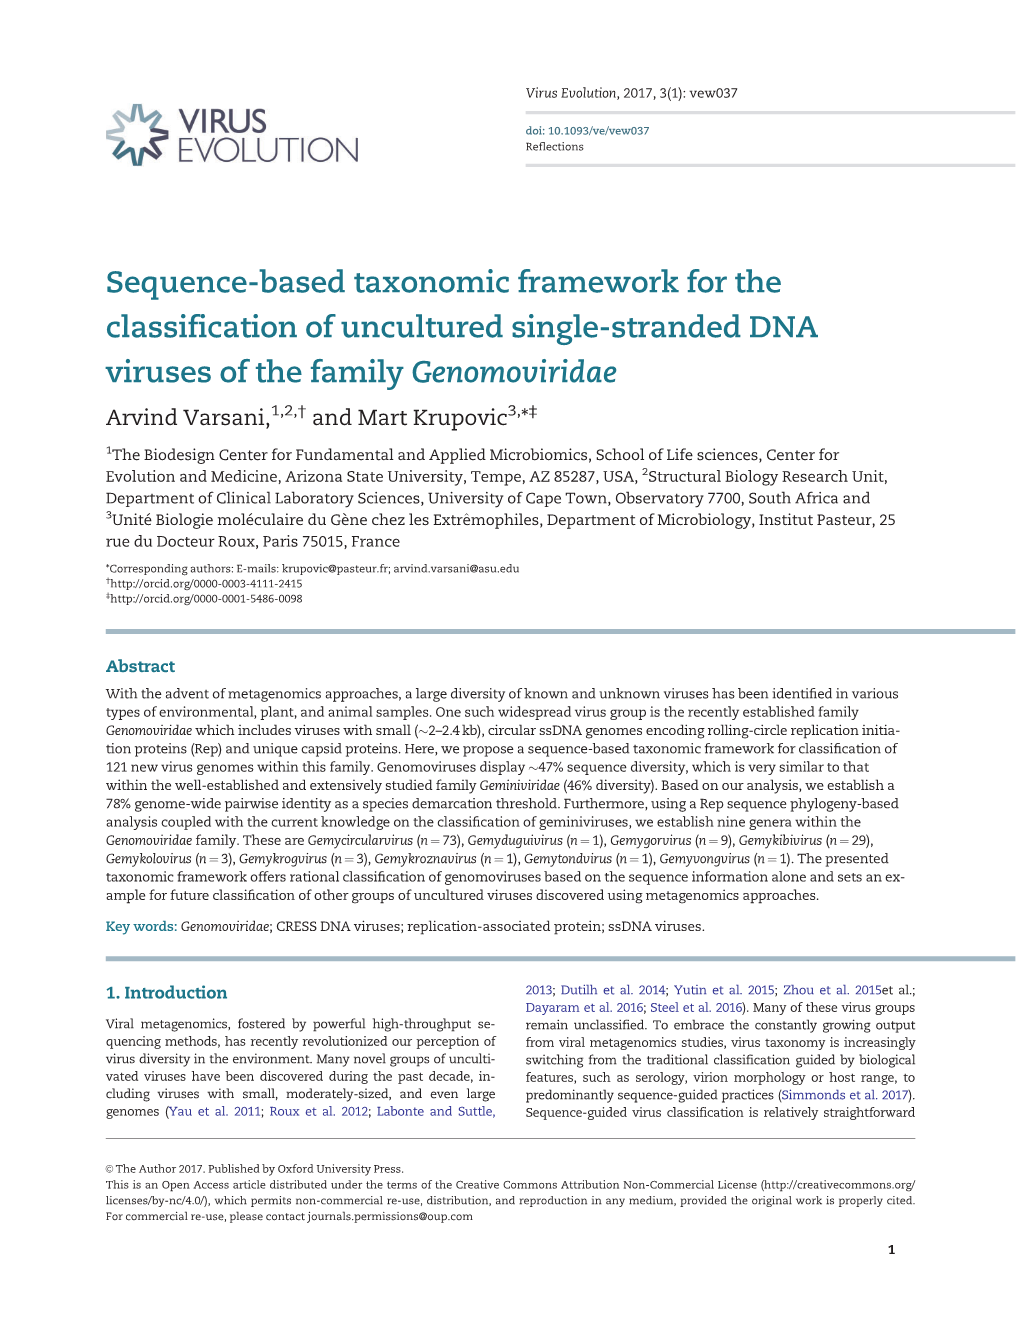 Sequence-Based Taxonomic Framework for the Classification of Uncultured Single-Stranded DNA Viruses of the Family Genomoviridae